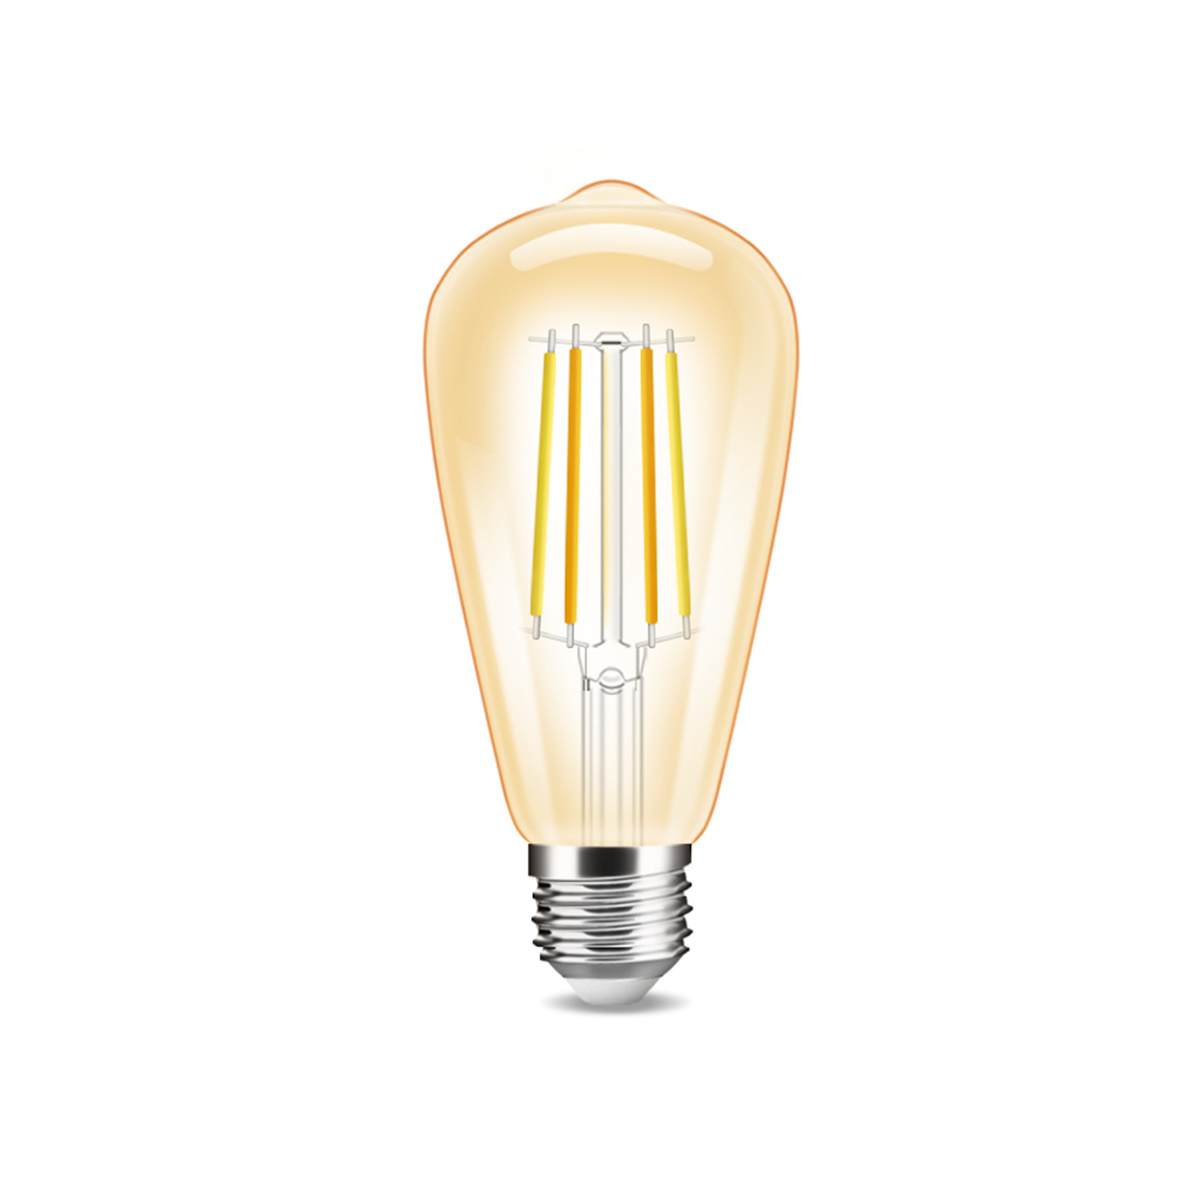 High Quality Led Ceiling Light - Dimmable Smart Filament Bulb E27 Vintage With tunable white 2200-6500K CBS – C-Lux